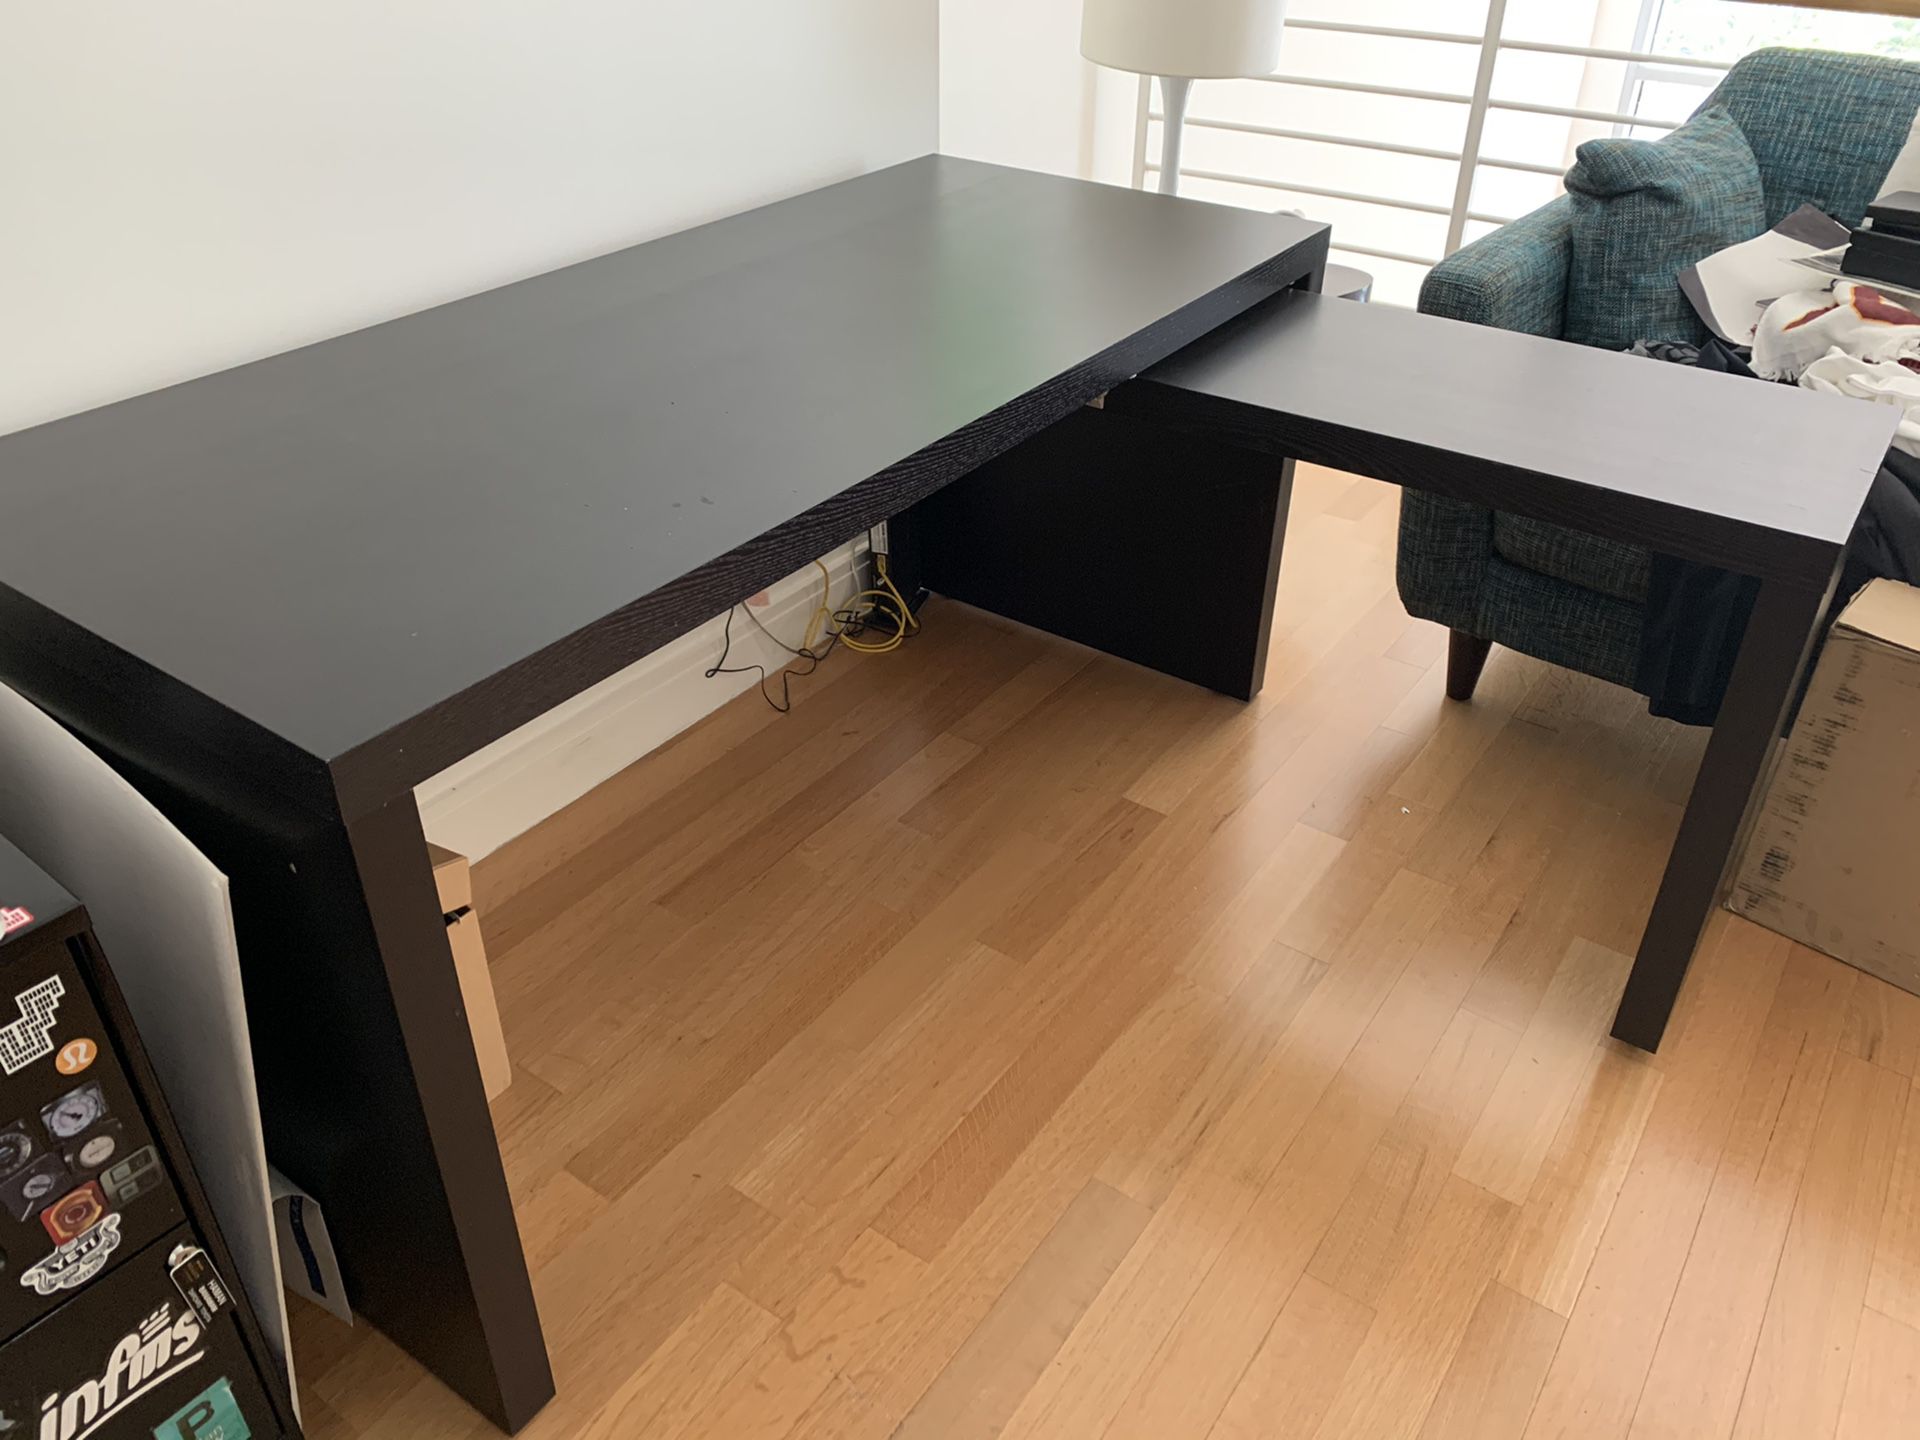 IKEA Office Desk - pull out section